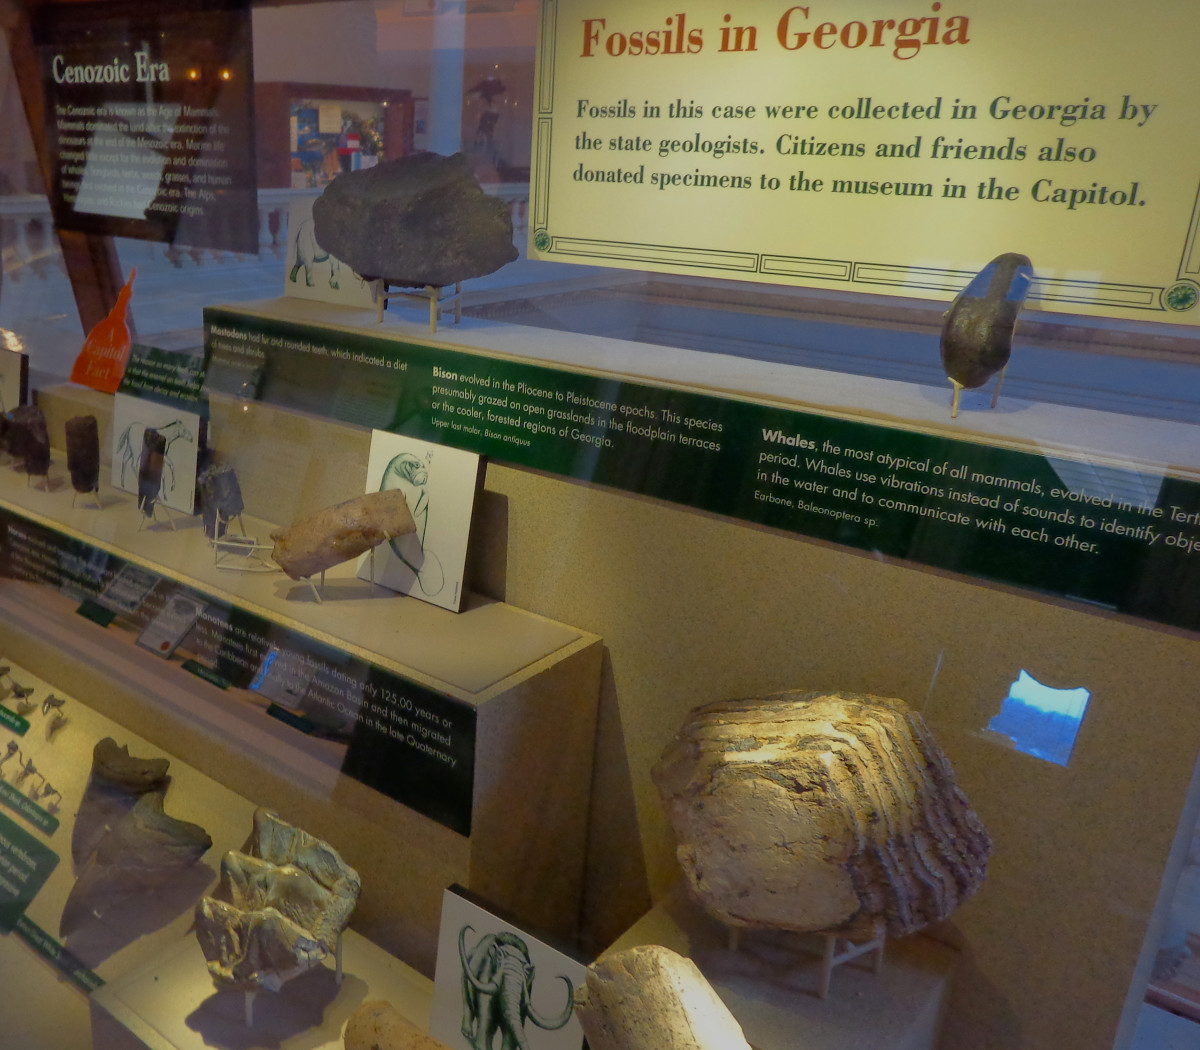 Fossils in Georgia.  Photo by author.